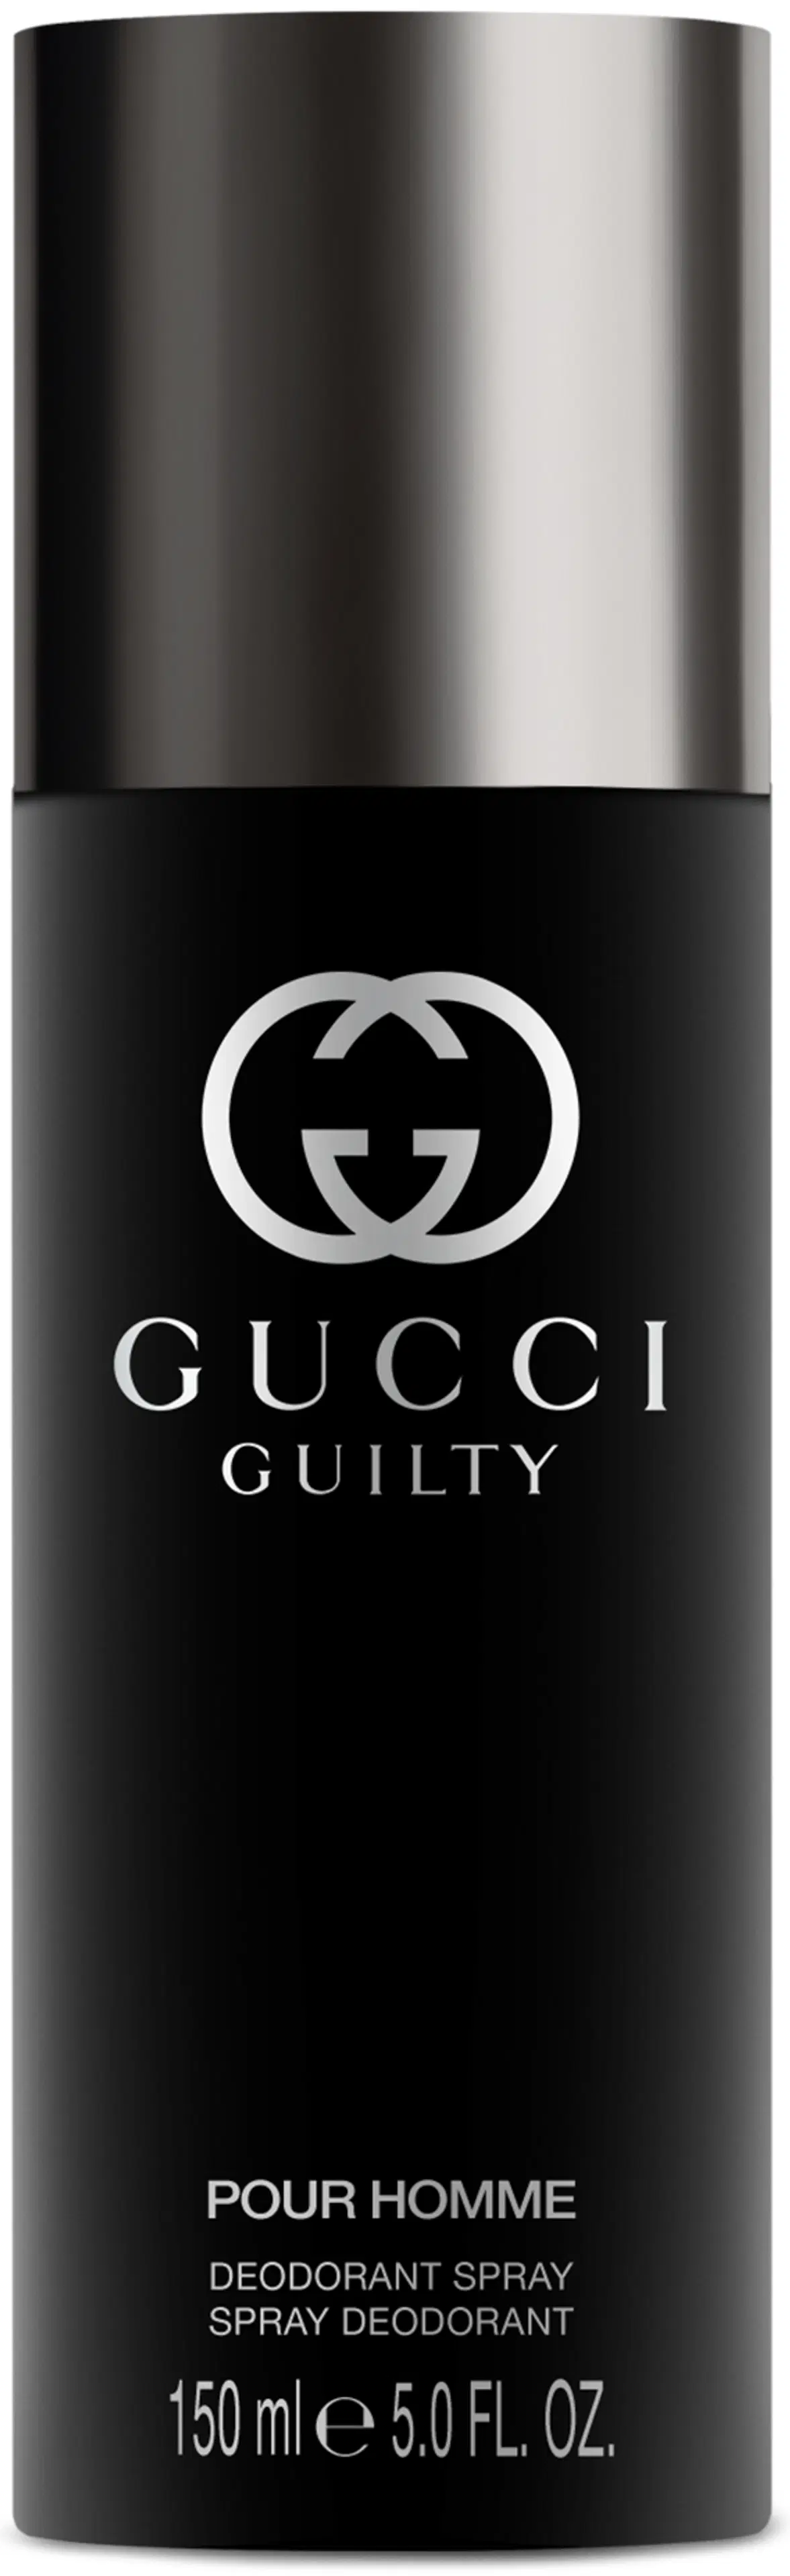 Gucci Guilty Pour Homme Deo Spray deodorantti 150 ml